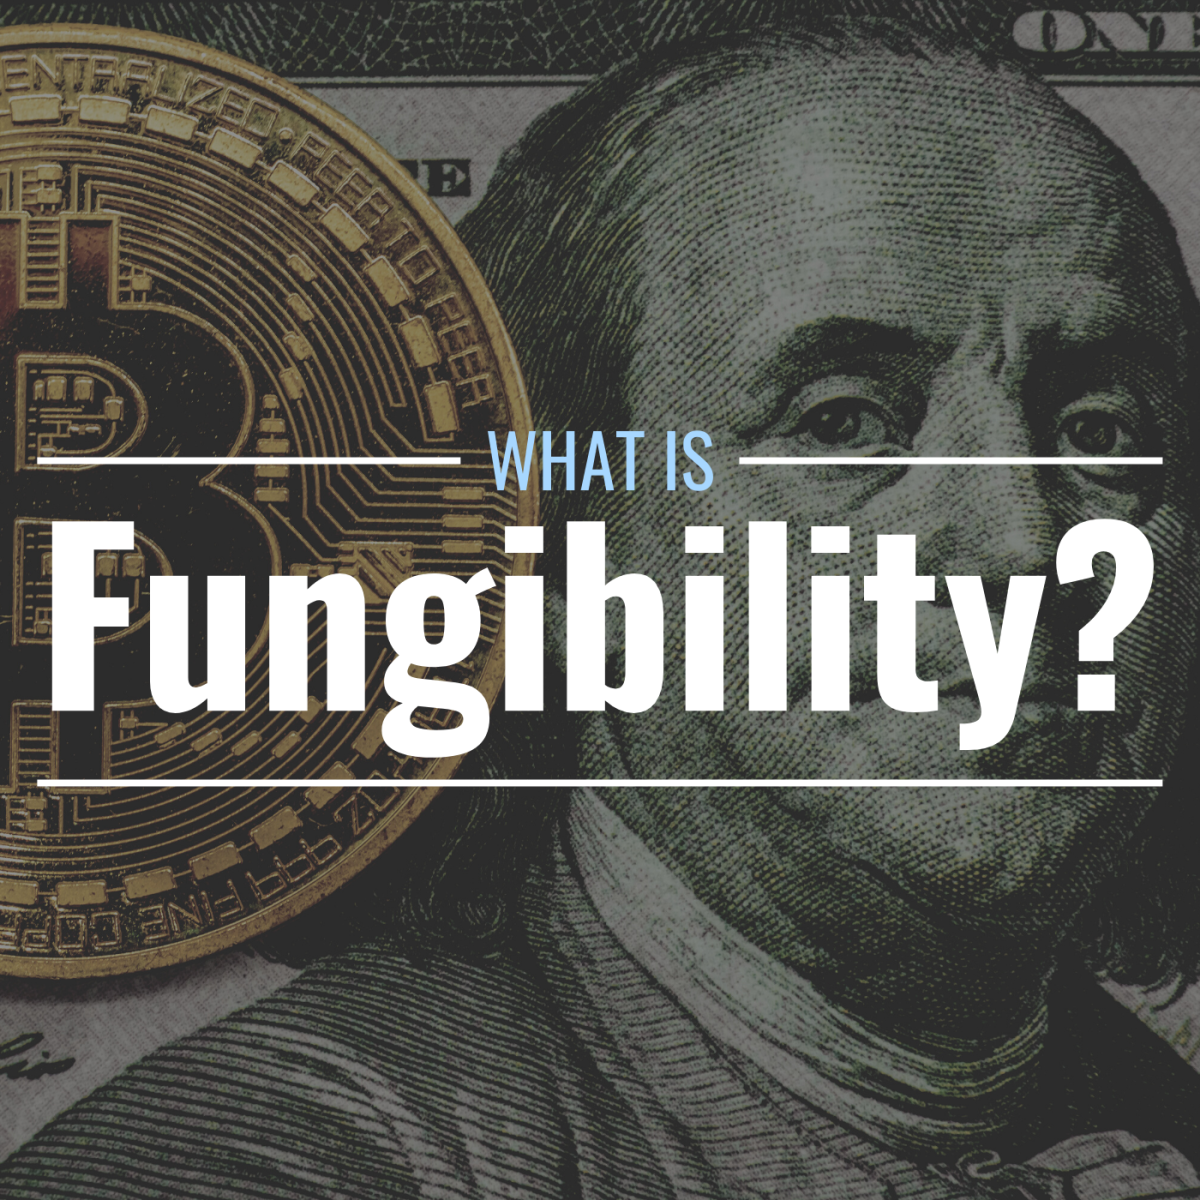 Darkened image of a U.S. $100 bill with a physical Bitcoin lying on top of it with text overlay that reads "What Is Fungibility?"